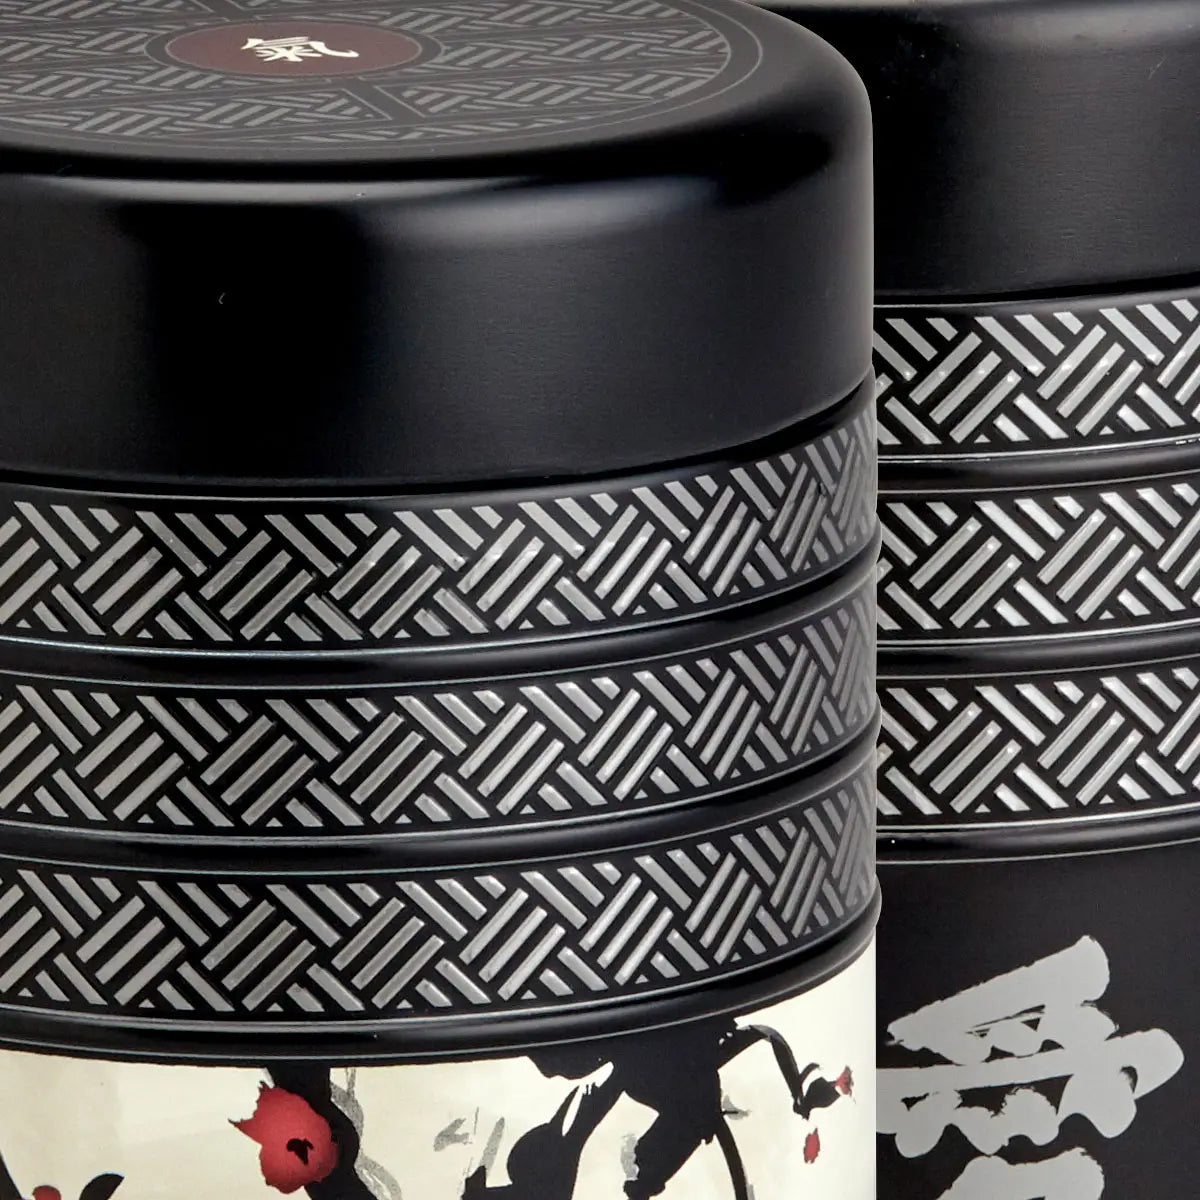 Tea Tin Kyoto 125 g( 2 styles to choose from )